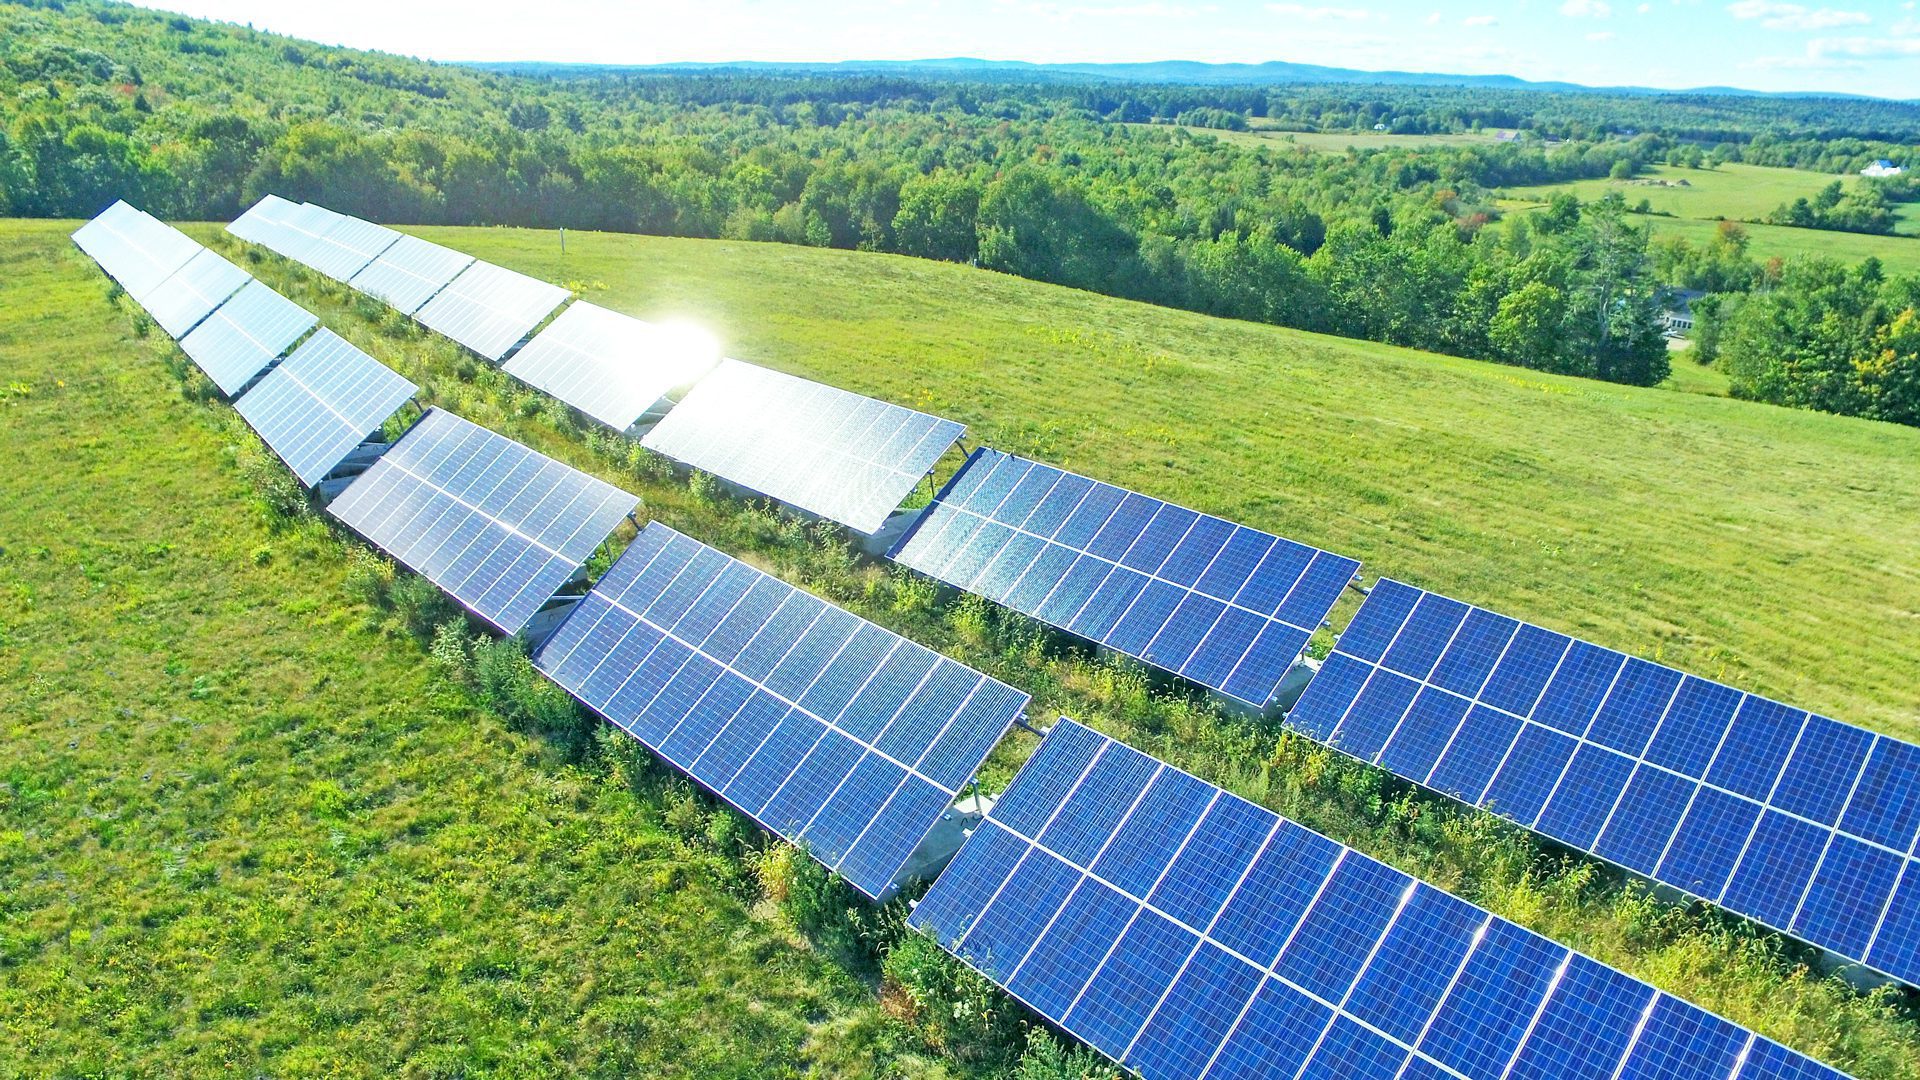 Amid a flood of solar applications, Maine seeks a more targeted approach